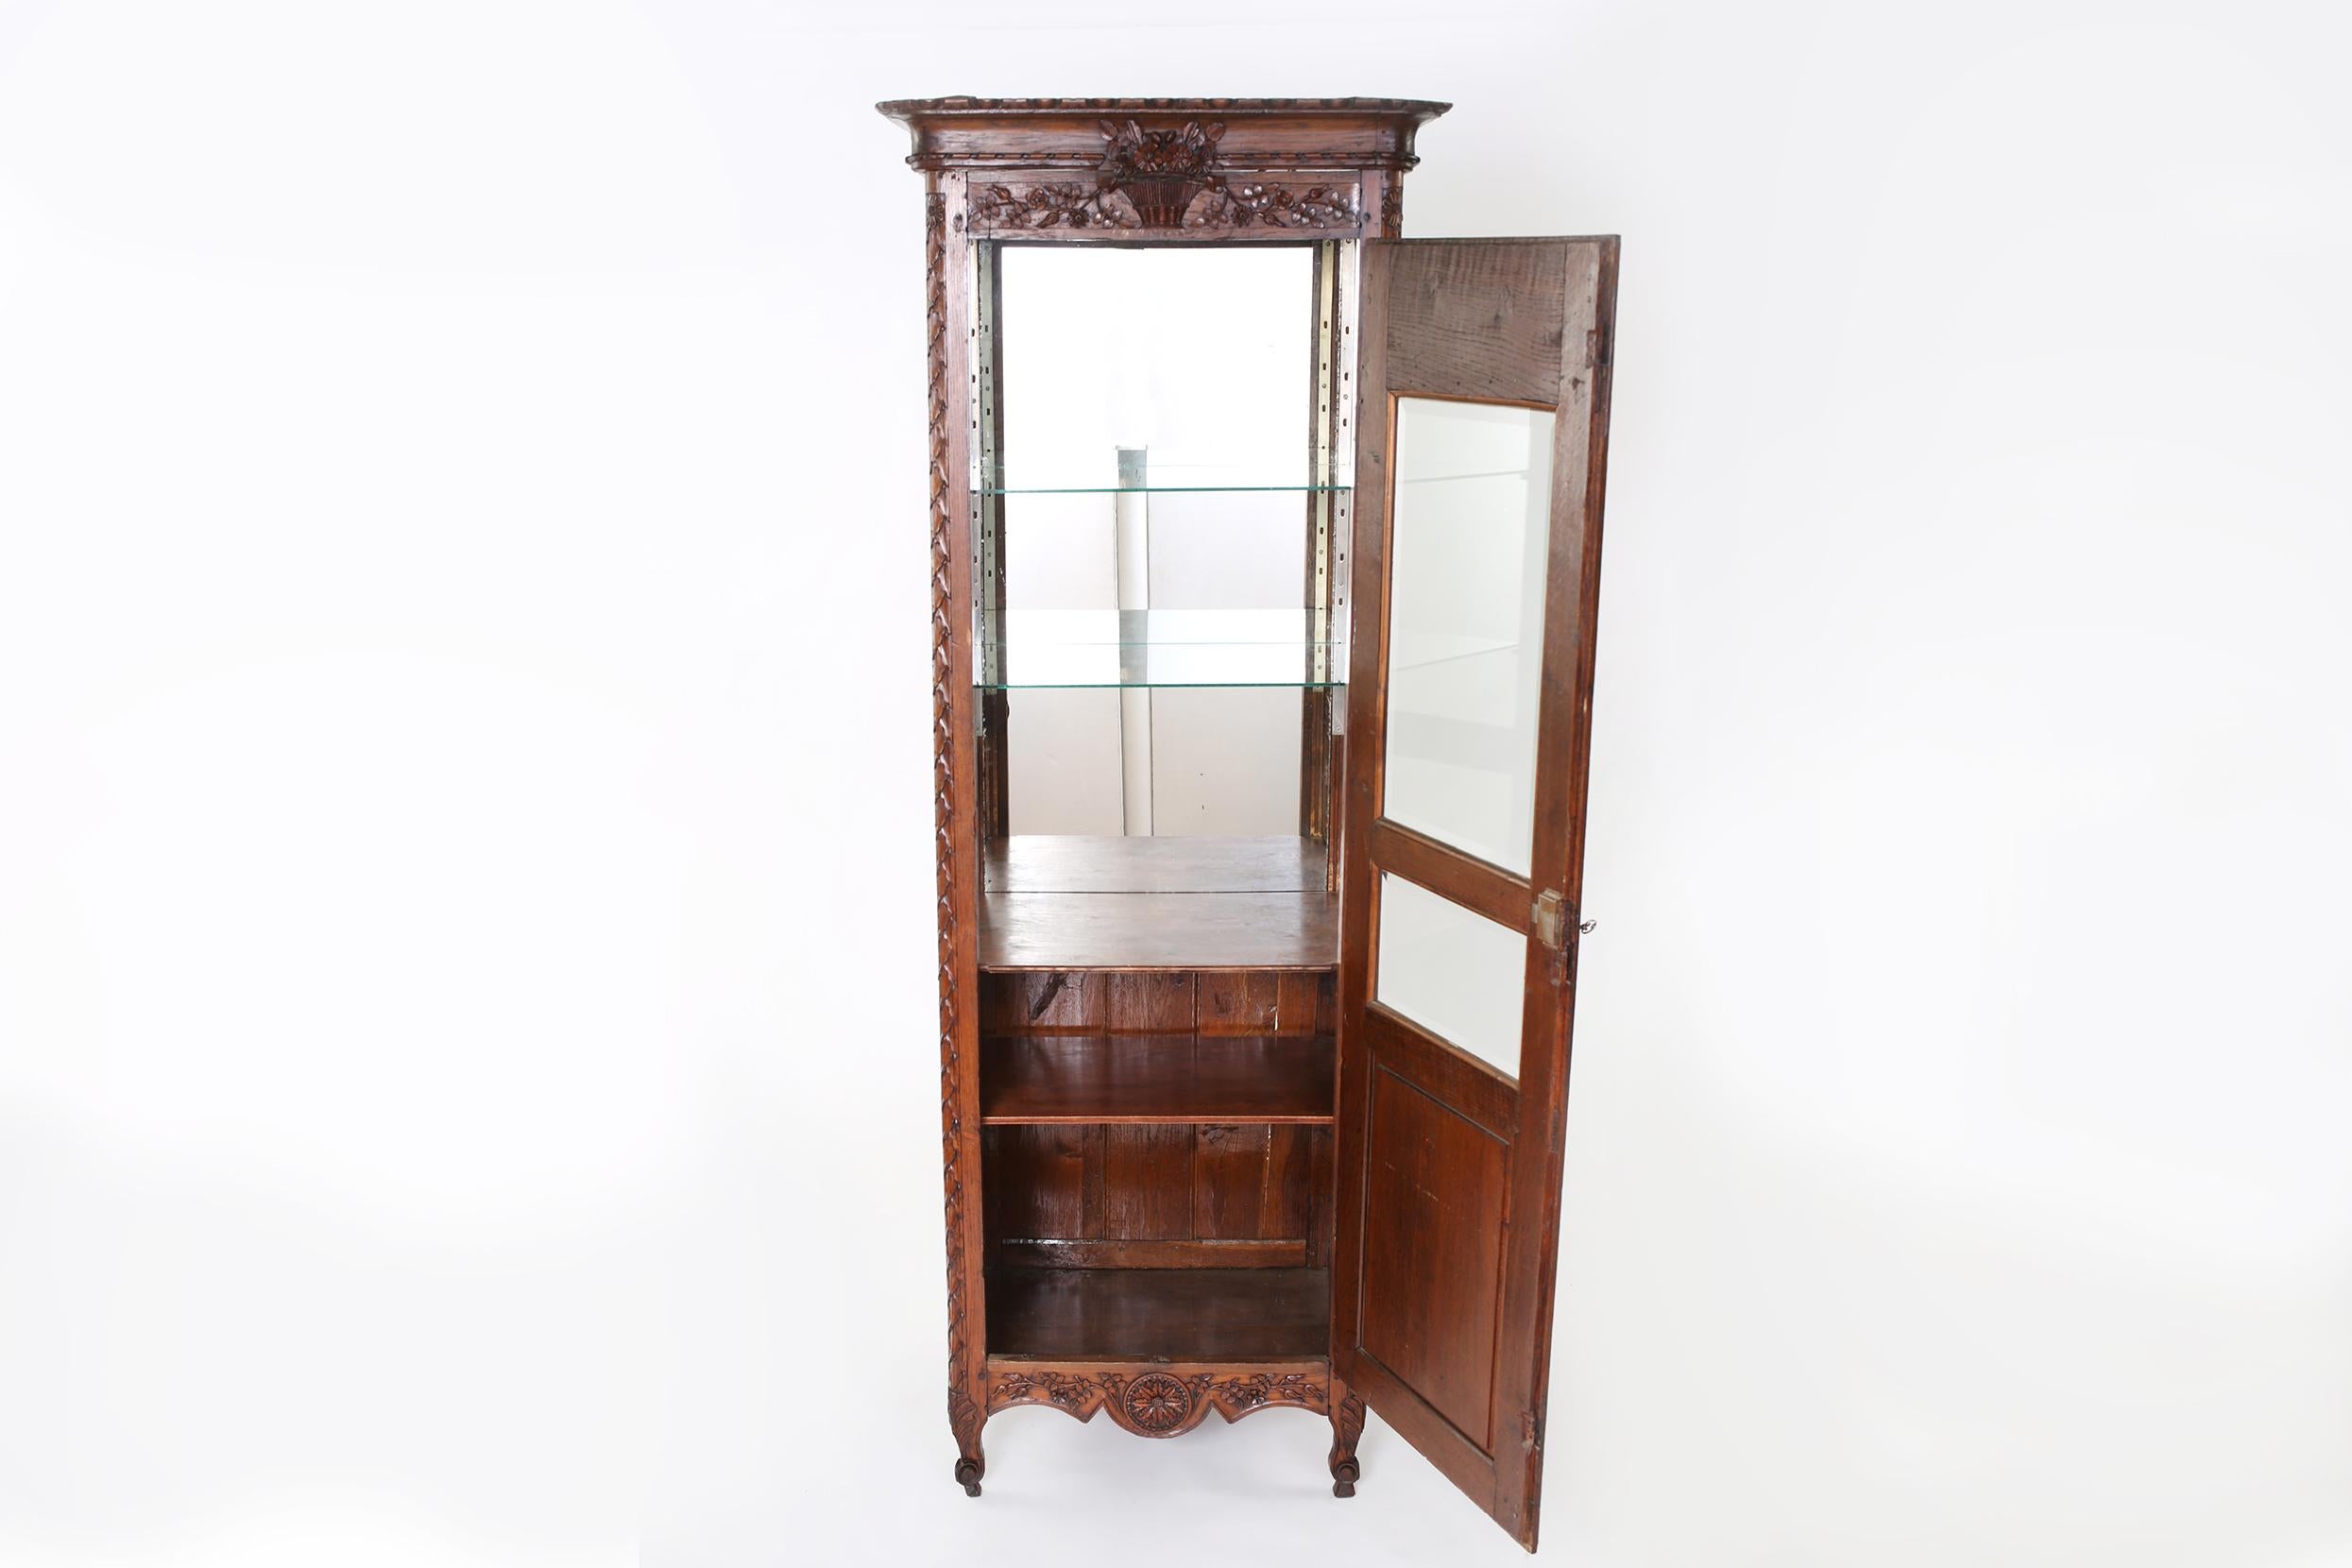 Early 19th century French Renaissance Revival hand carved walnut display cabinet with exterior design details. The display cabinet is in good antique condition with age / use appropriate wear. Crown molding top completely removable for easy access